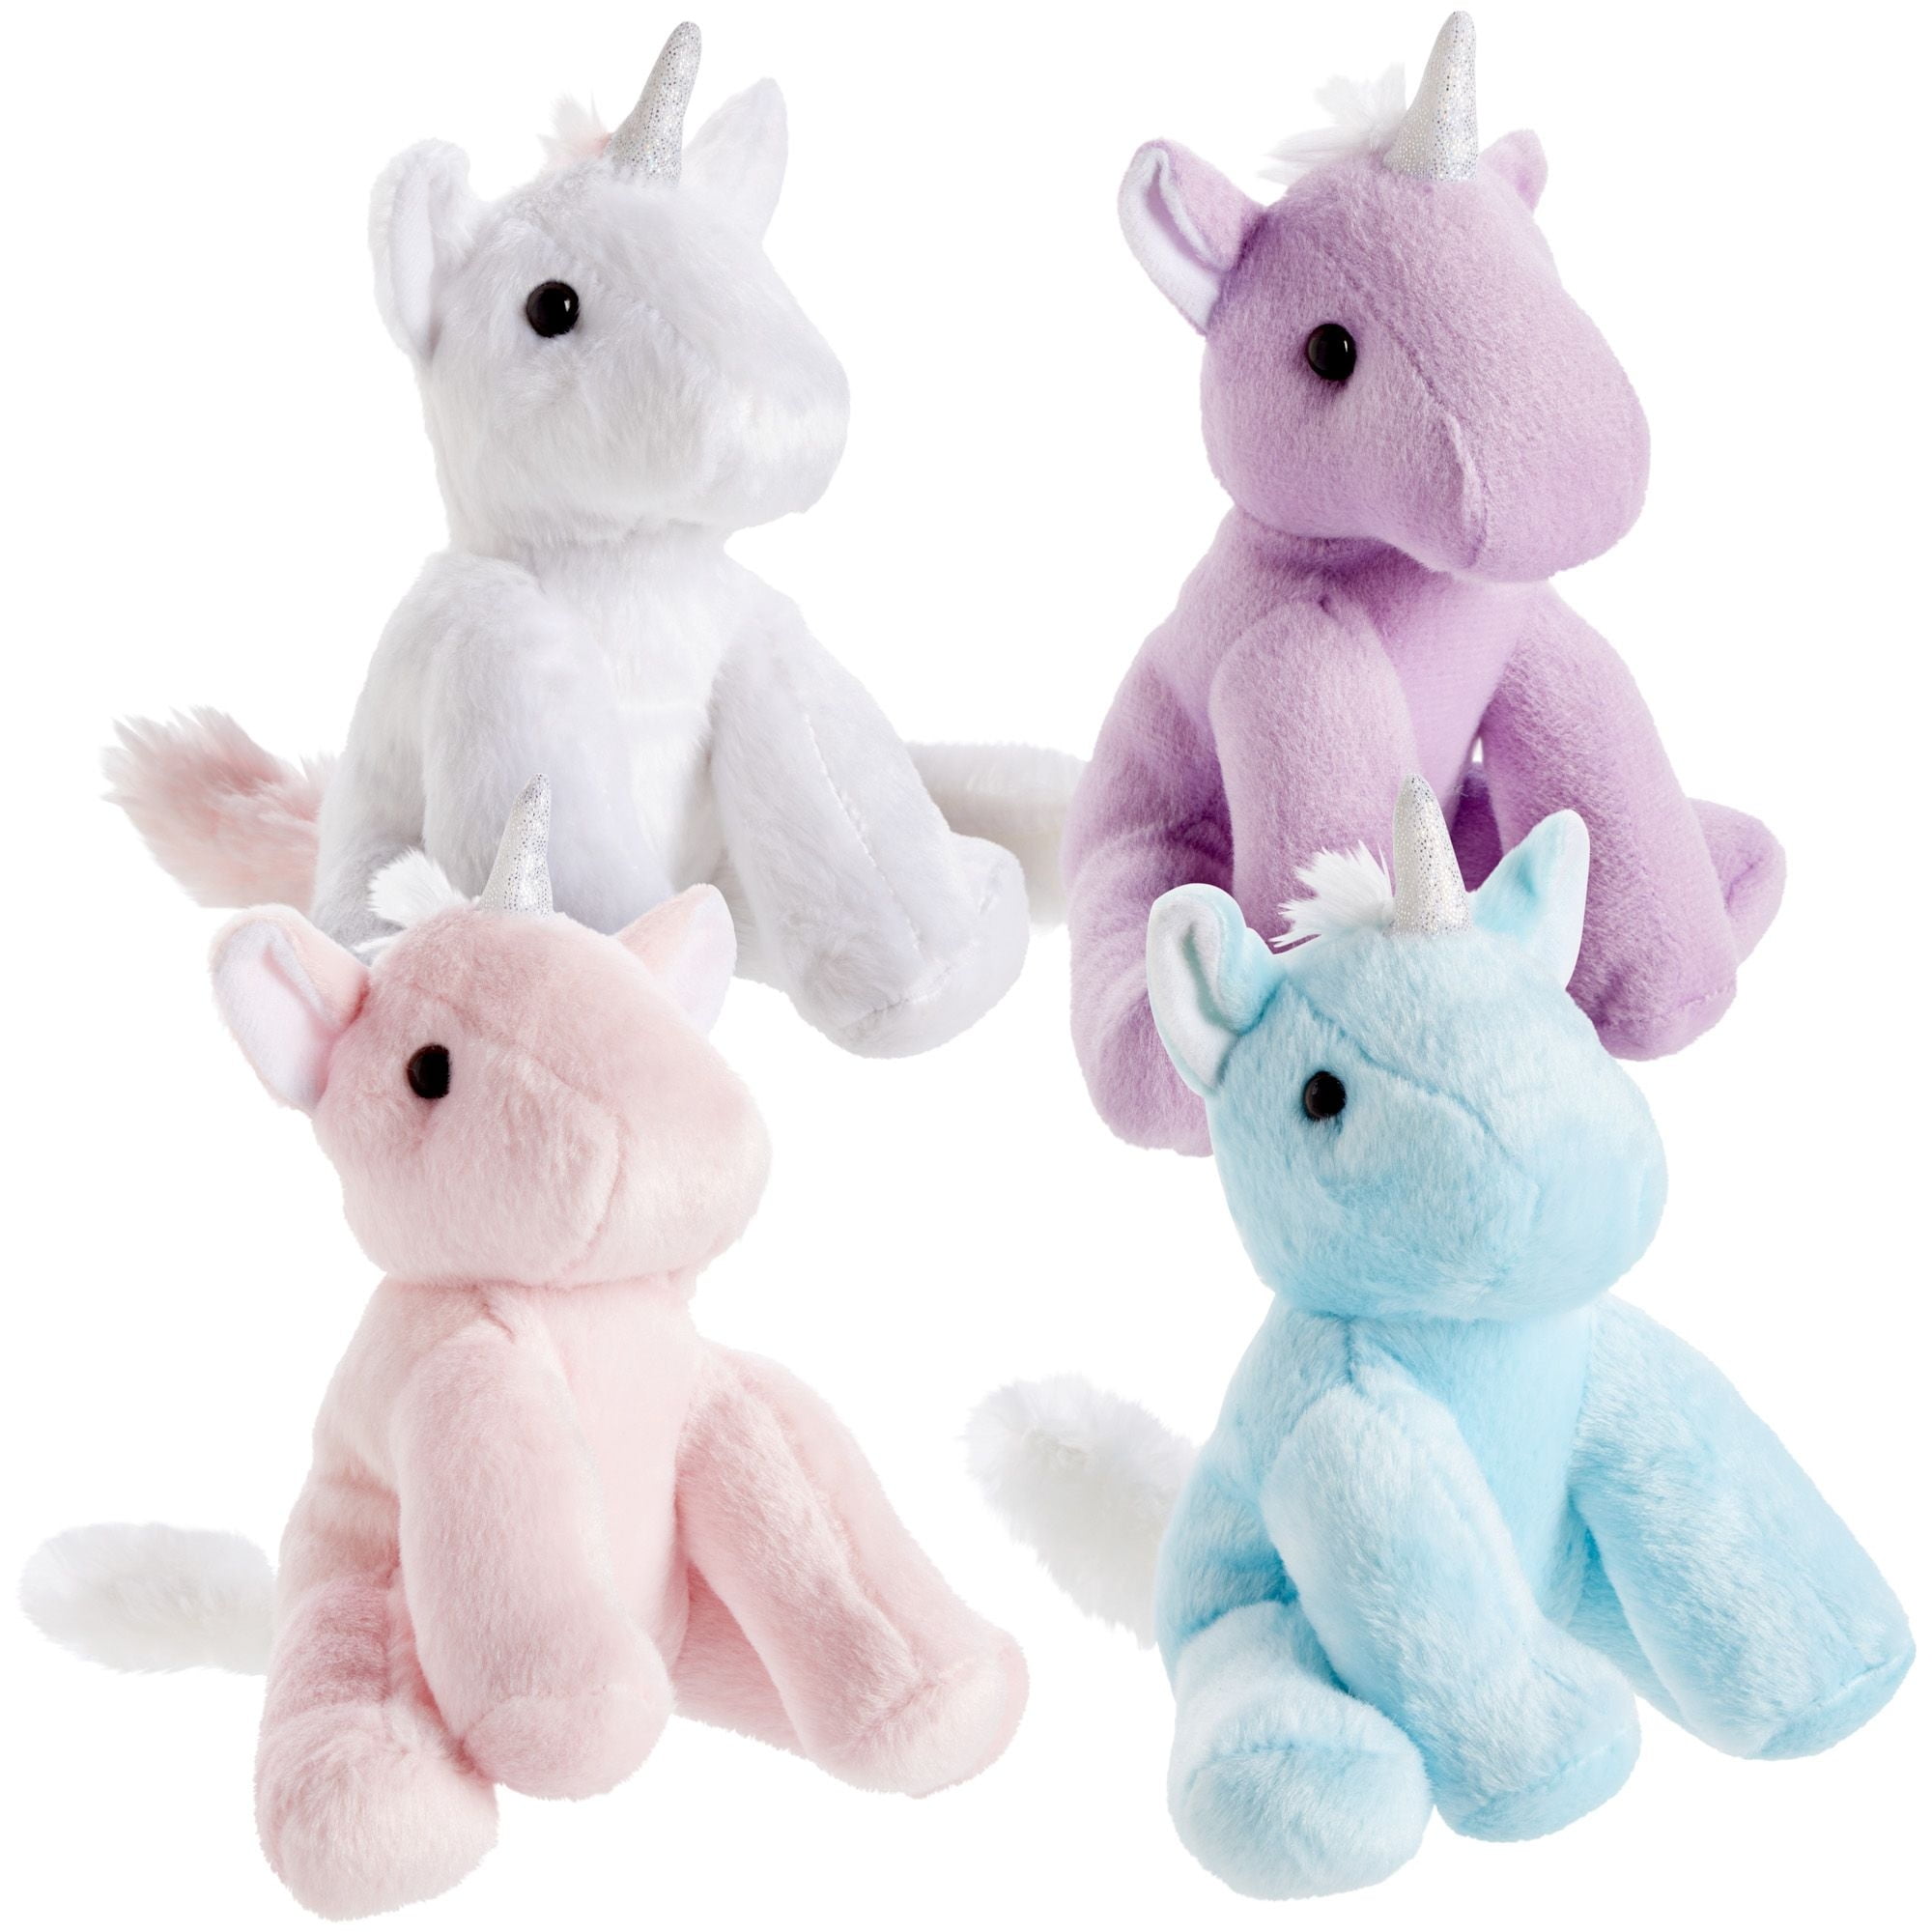 KMUYSL Unicorn Toys for Girls Ages 3 4 5 6 7 8+ Year - Unicorn Mommy  Stuffed Animal with 4 Baby Unicorns in Her Tummy, Valentines and Birthday  Gifts